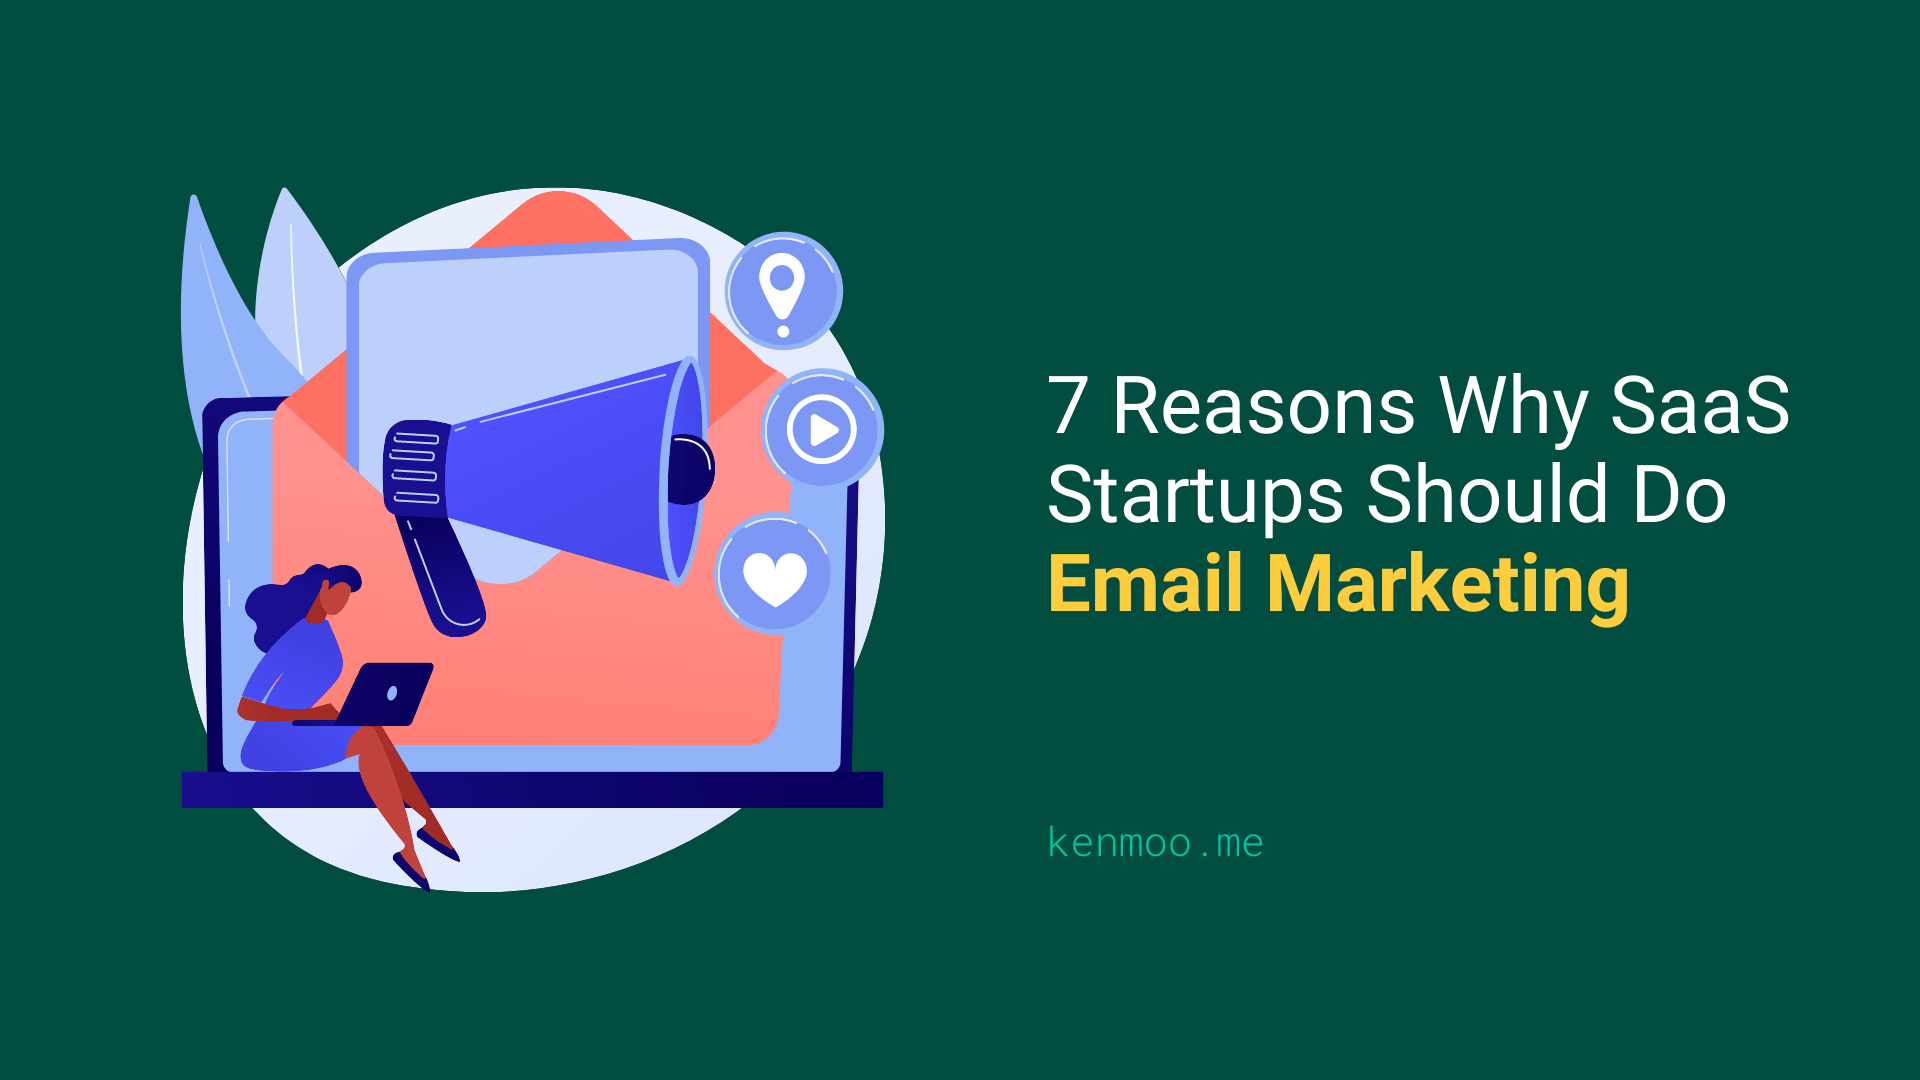 7 Reasons Why SaaS Startups Should Do Email Marketing